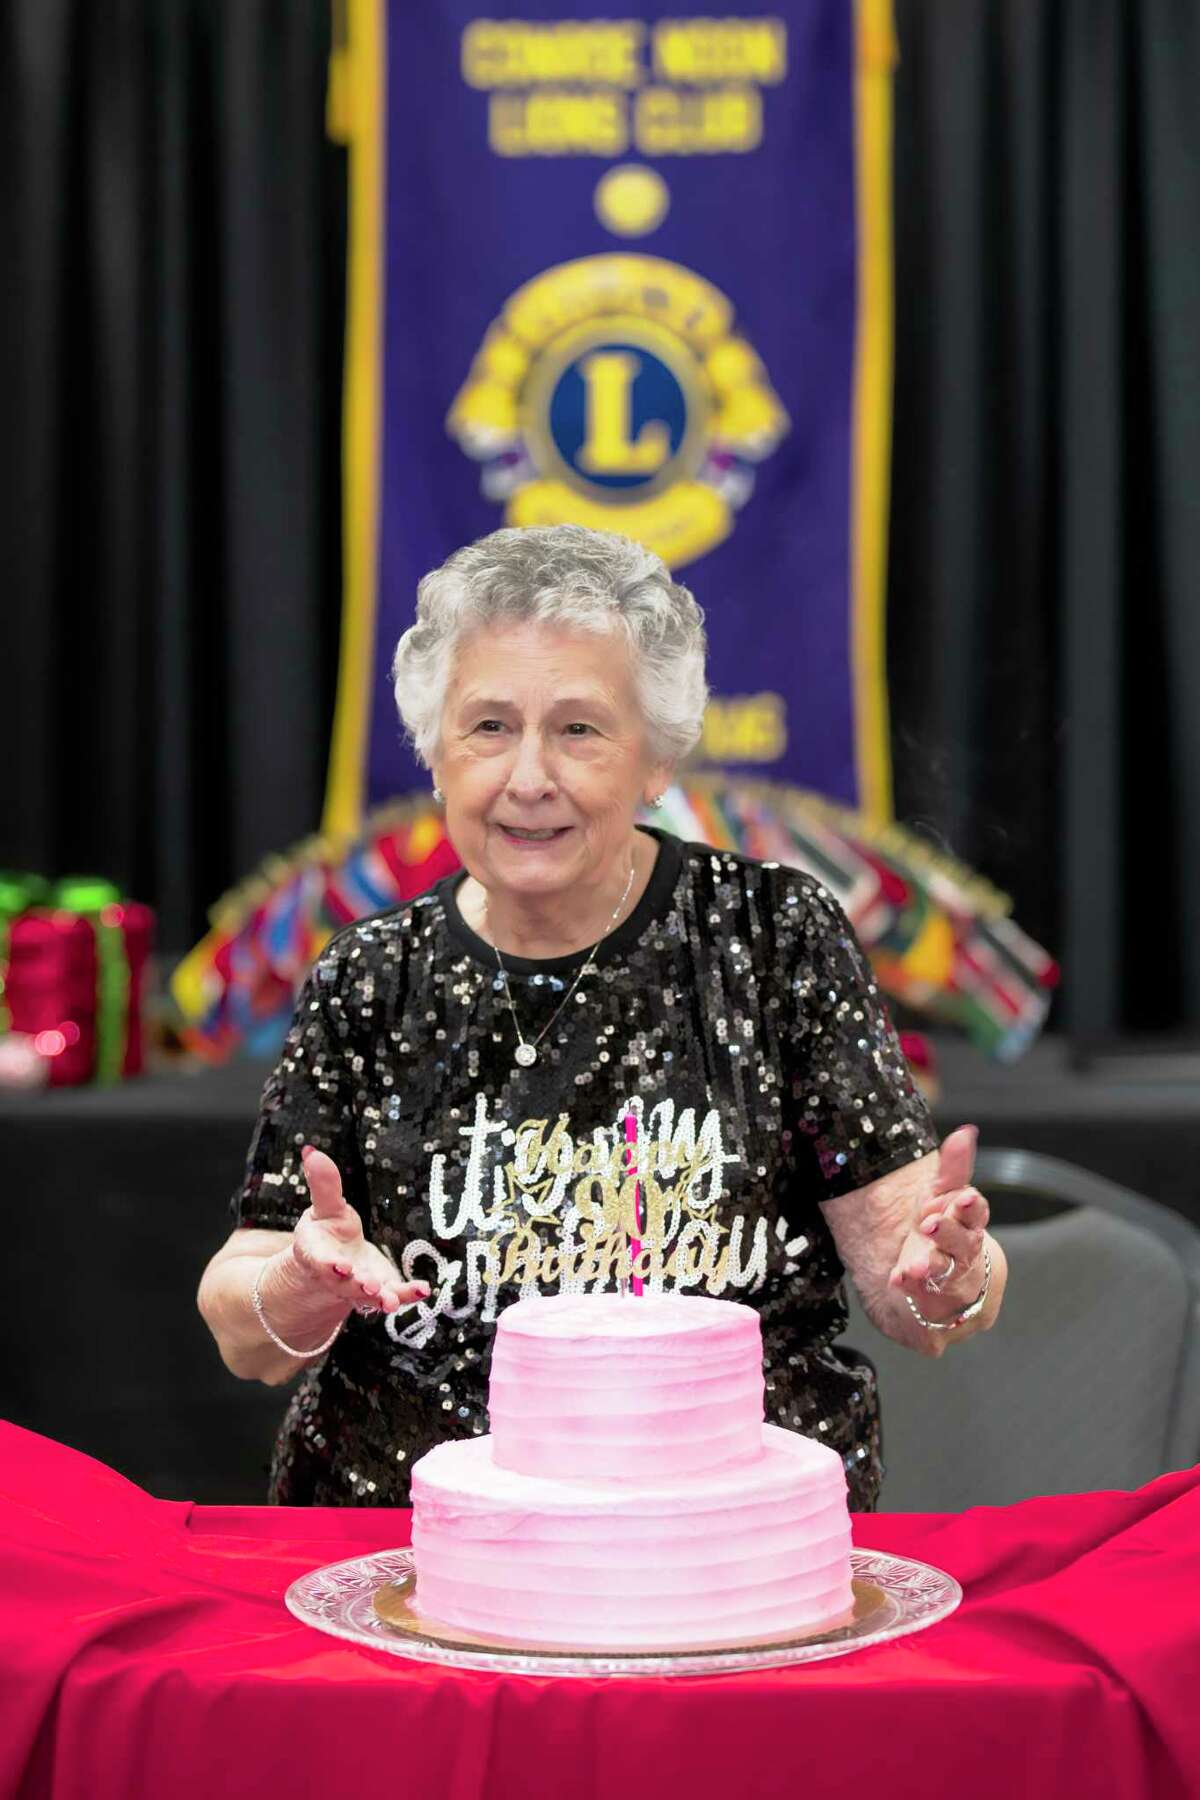 Special Day for a Special Lion - The Conroe Noon Lions Club honored one of their club monarchs Lion Ladoris Cates on her 90th Birthday last Wednesday, she has been affiliated with the club since 1975.